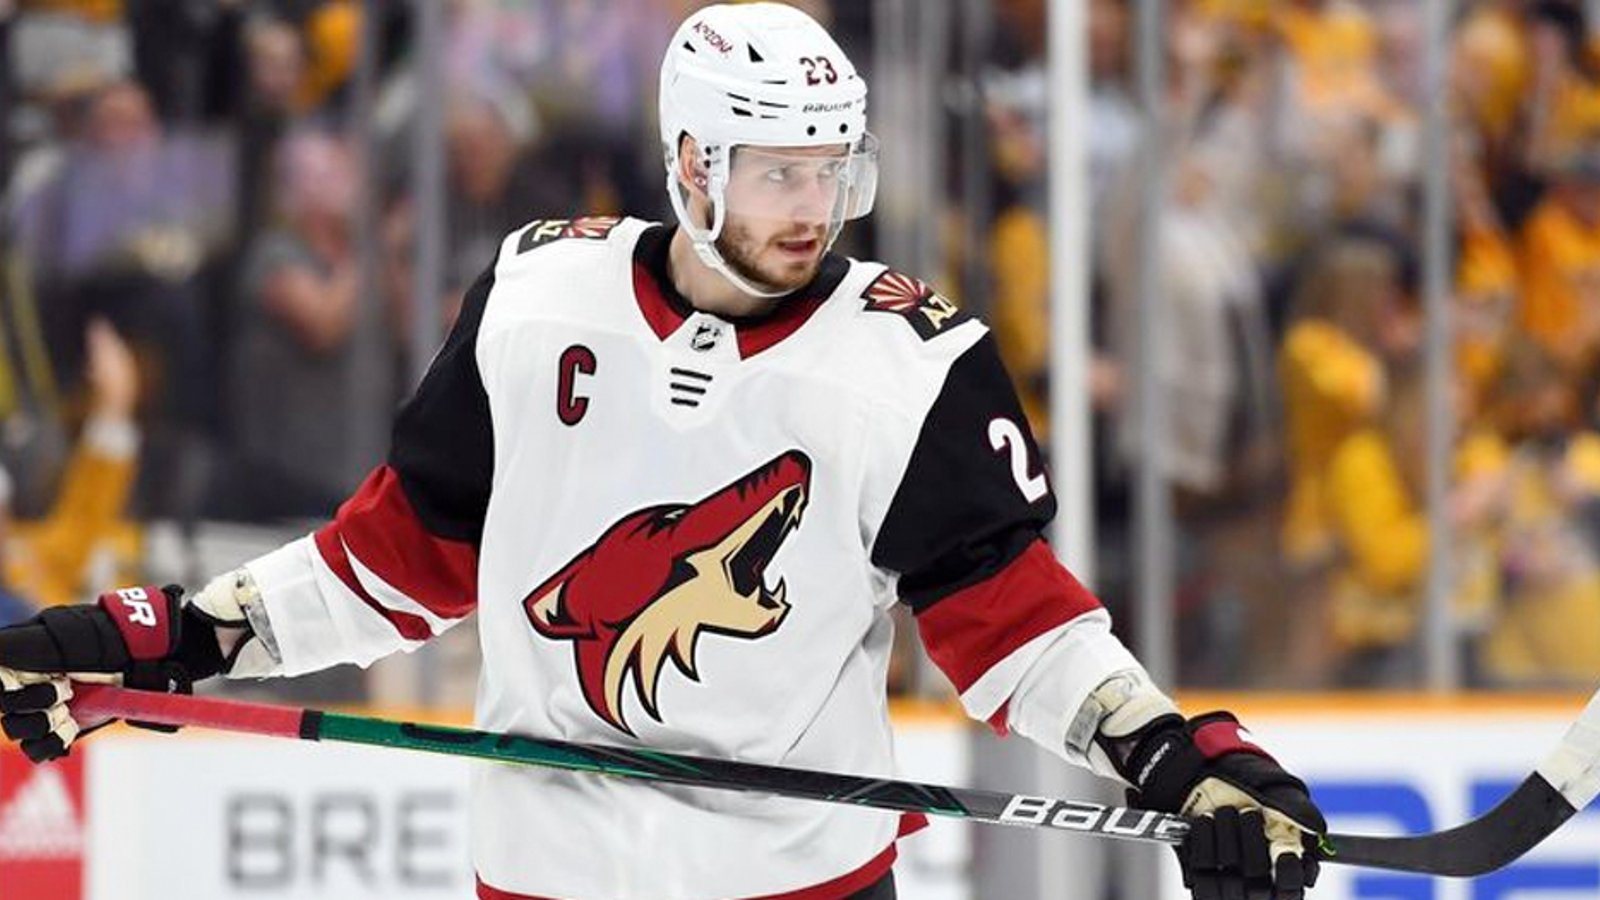 Ekman-Larsson finally speaks, claims he never demanded a trade